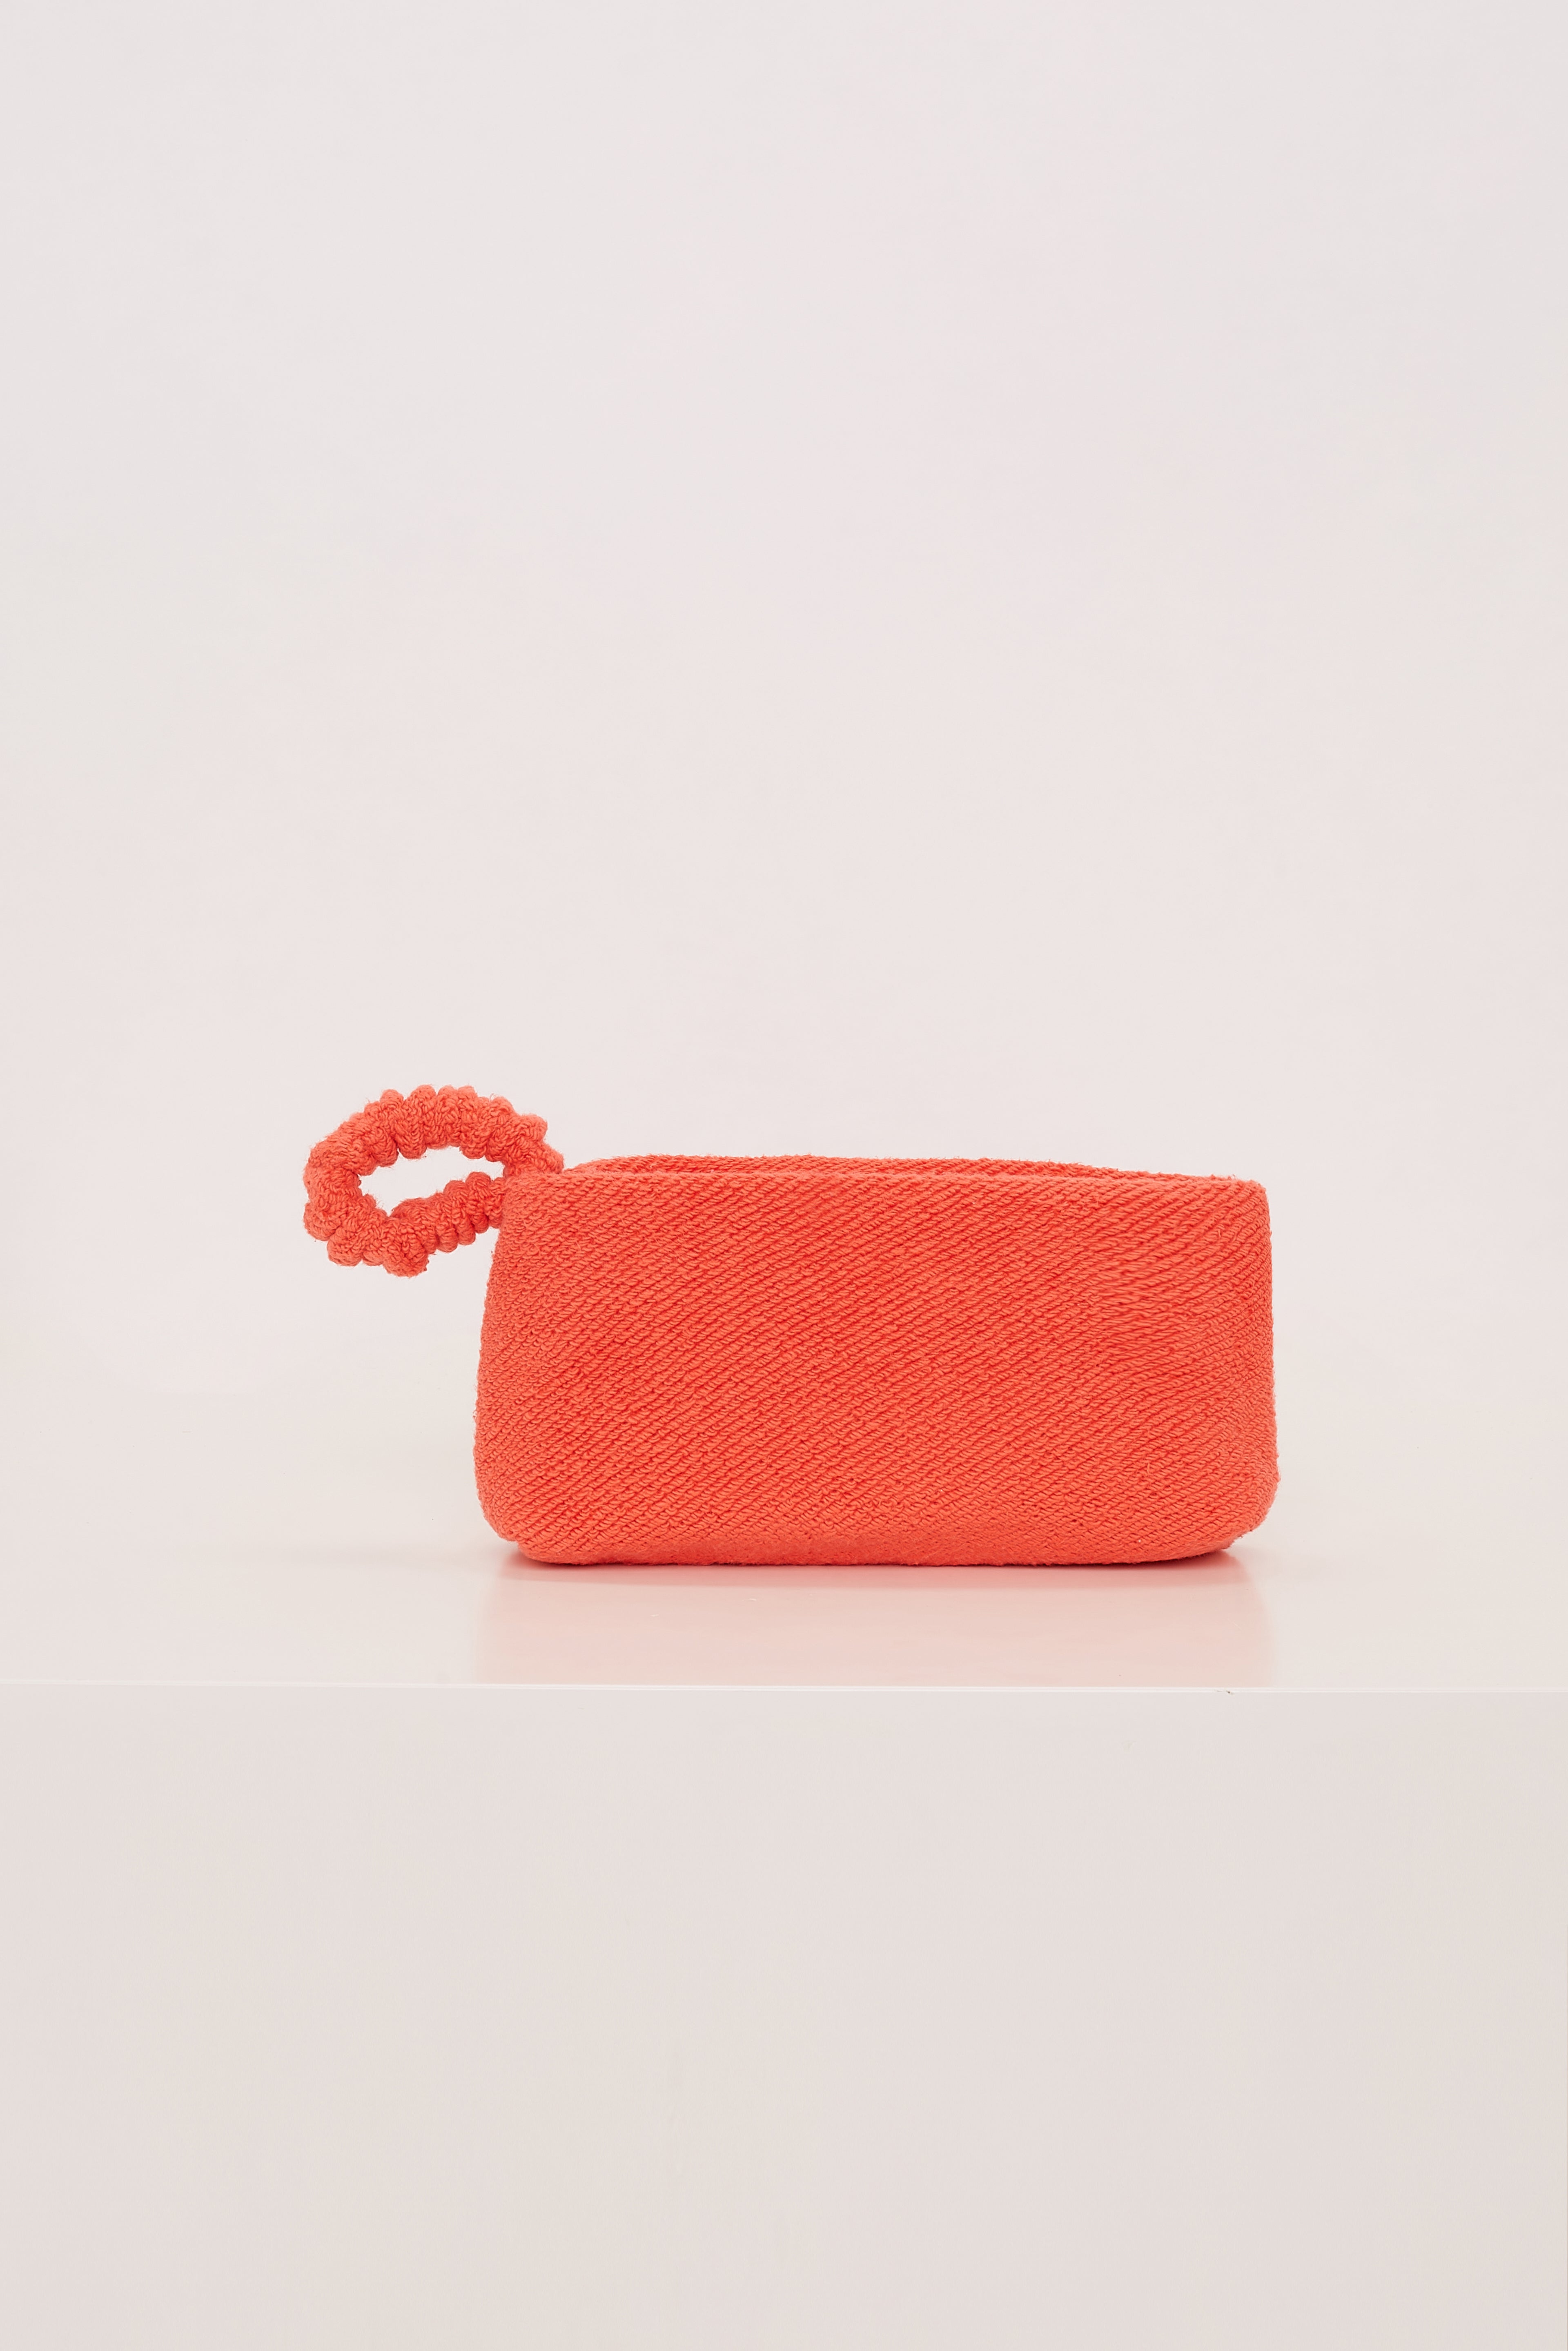 Dorothee-Schumacher-OUTLET-SALE-MODERN-TOWELLING-clutch-Accessoires-OS-spiced-orange-ARCHIVE-COLLECTION-2.jpg